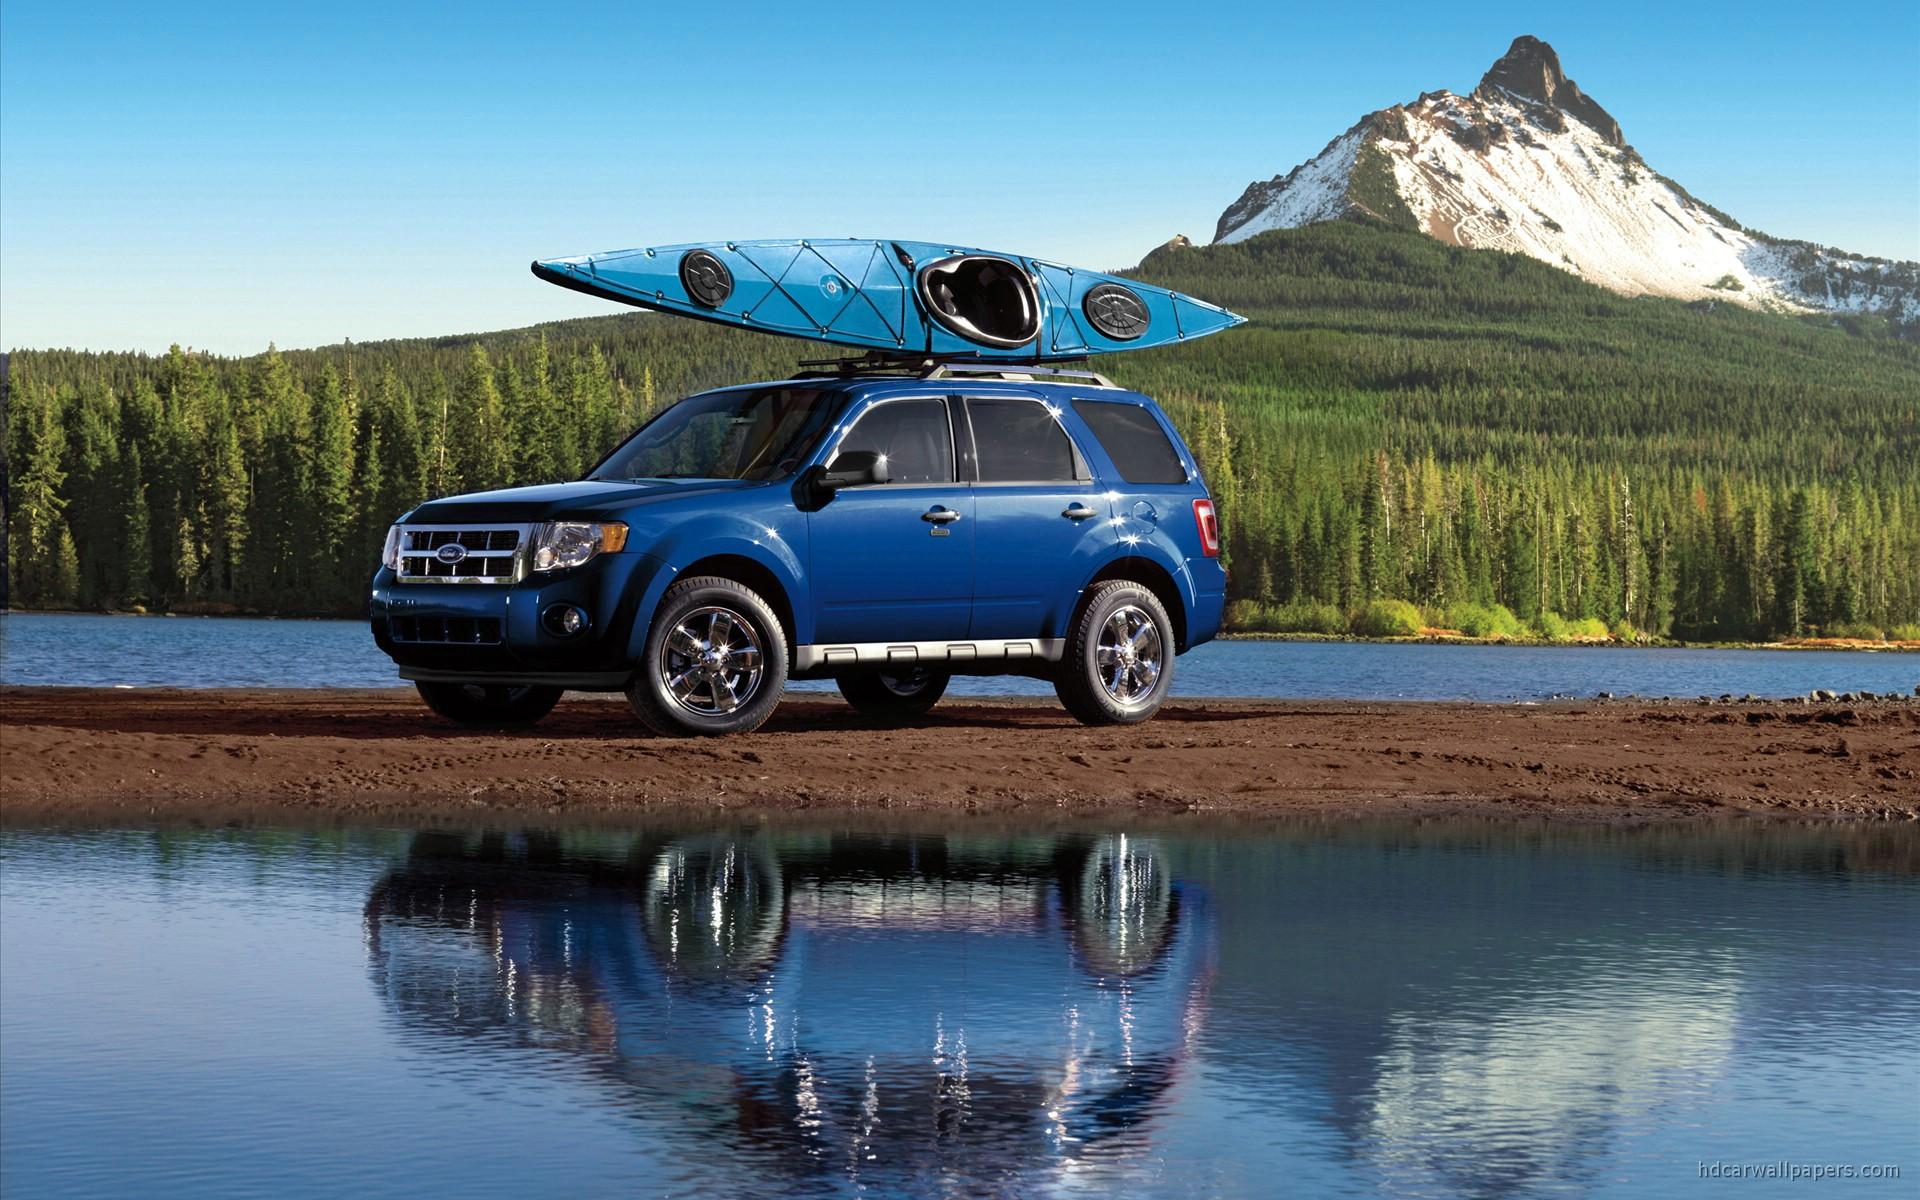 Ford Escape Wallpaper and Background Image